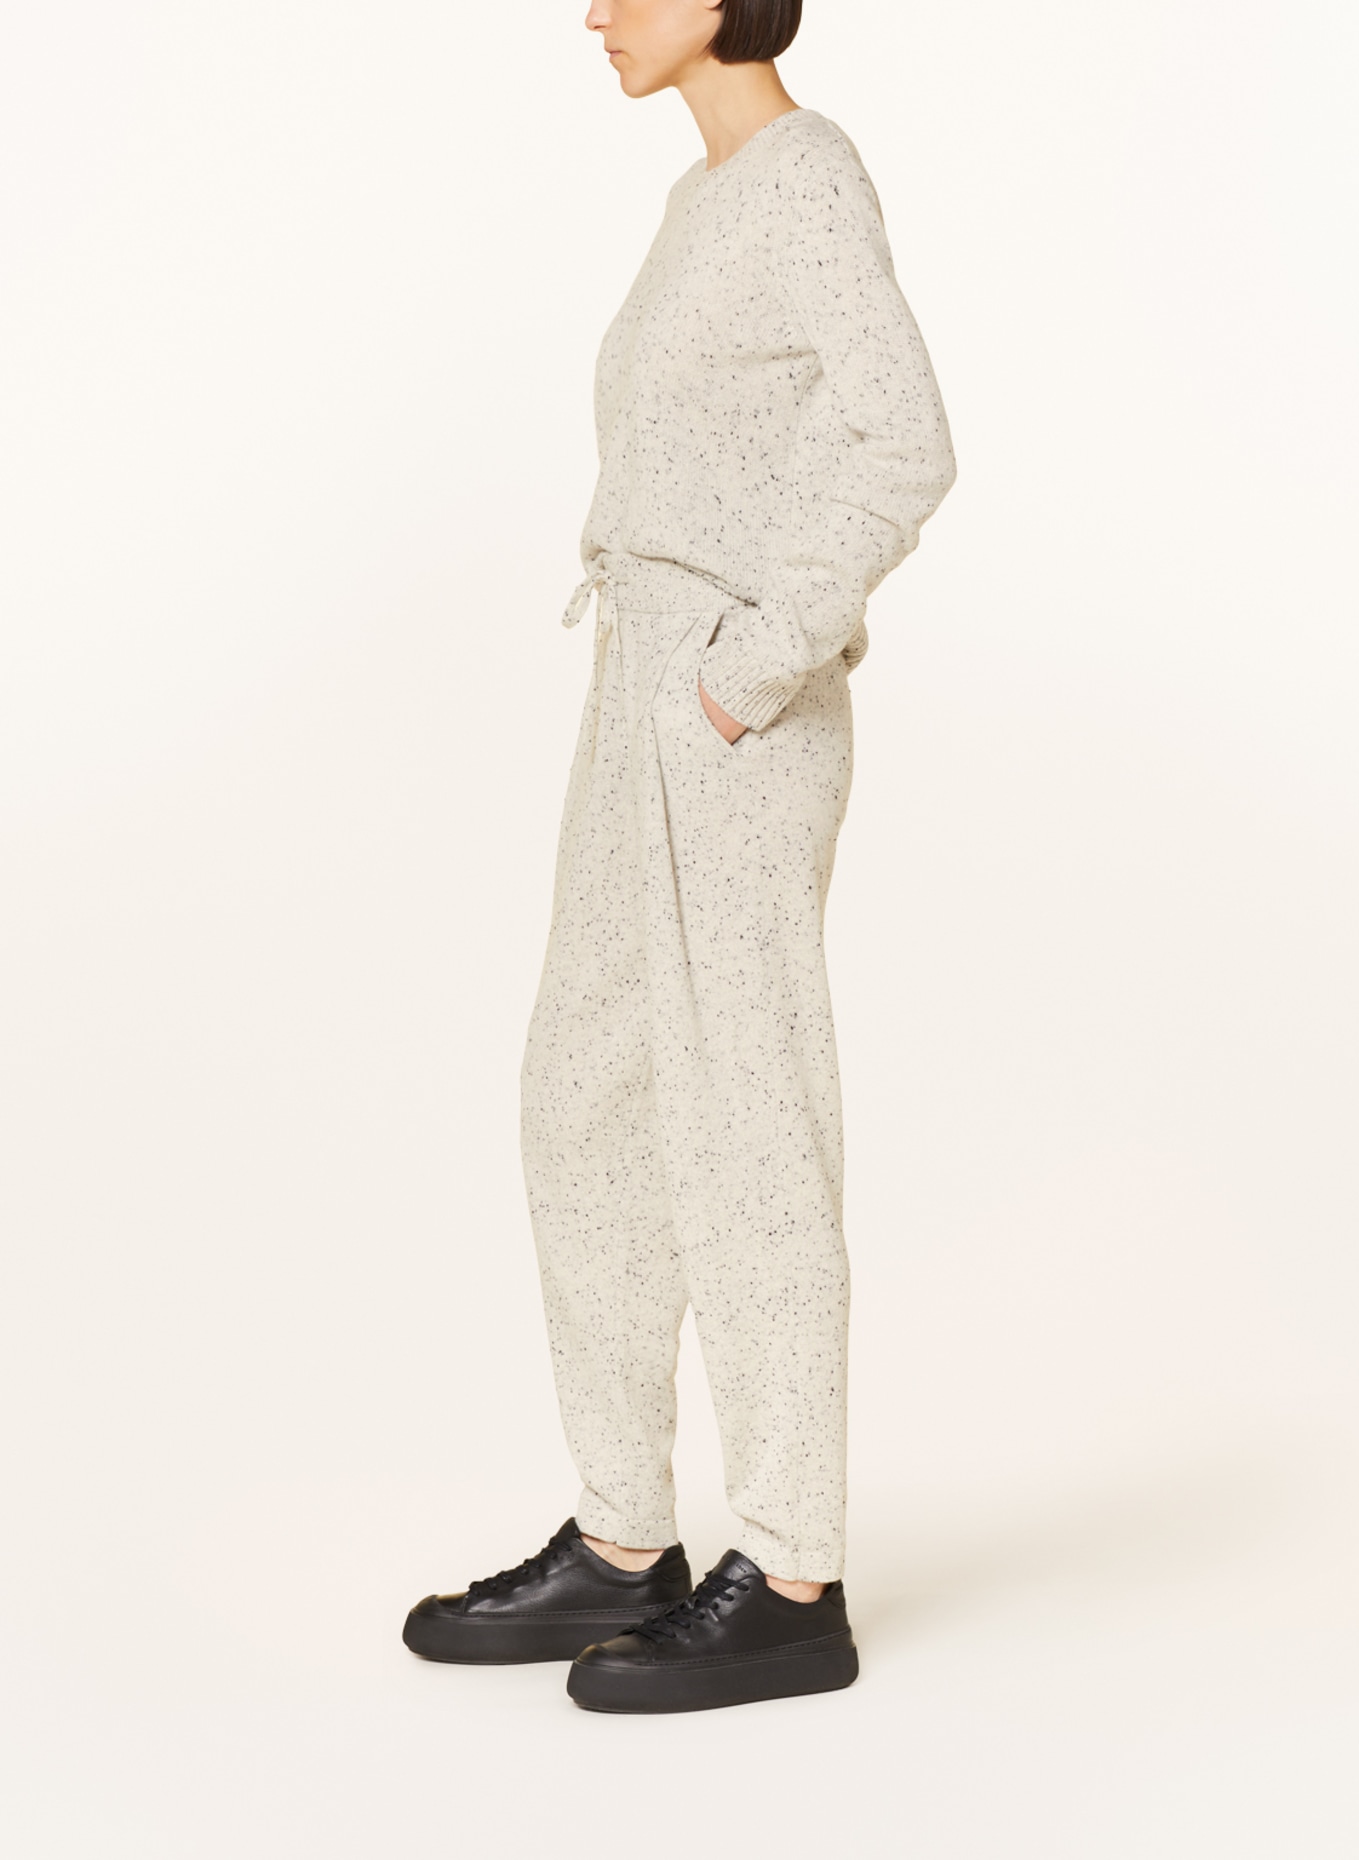 LISA YANG Knit trousers JO made of cashmere in jogger style, Color: LIGHT GRAY/ DARK GRAY (Image 4)